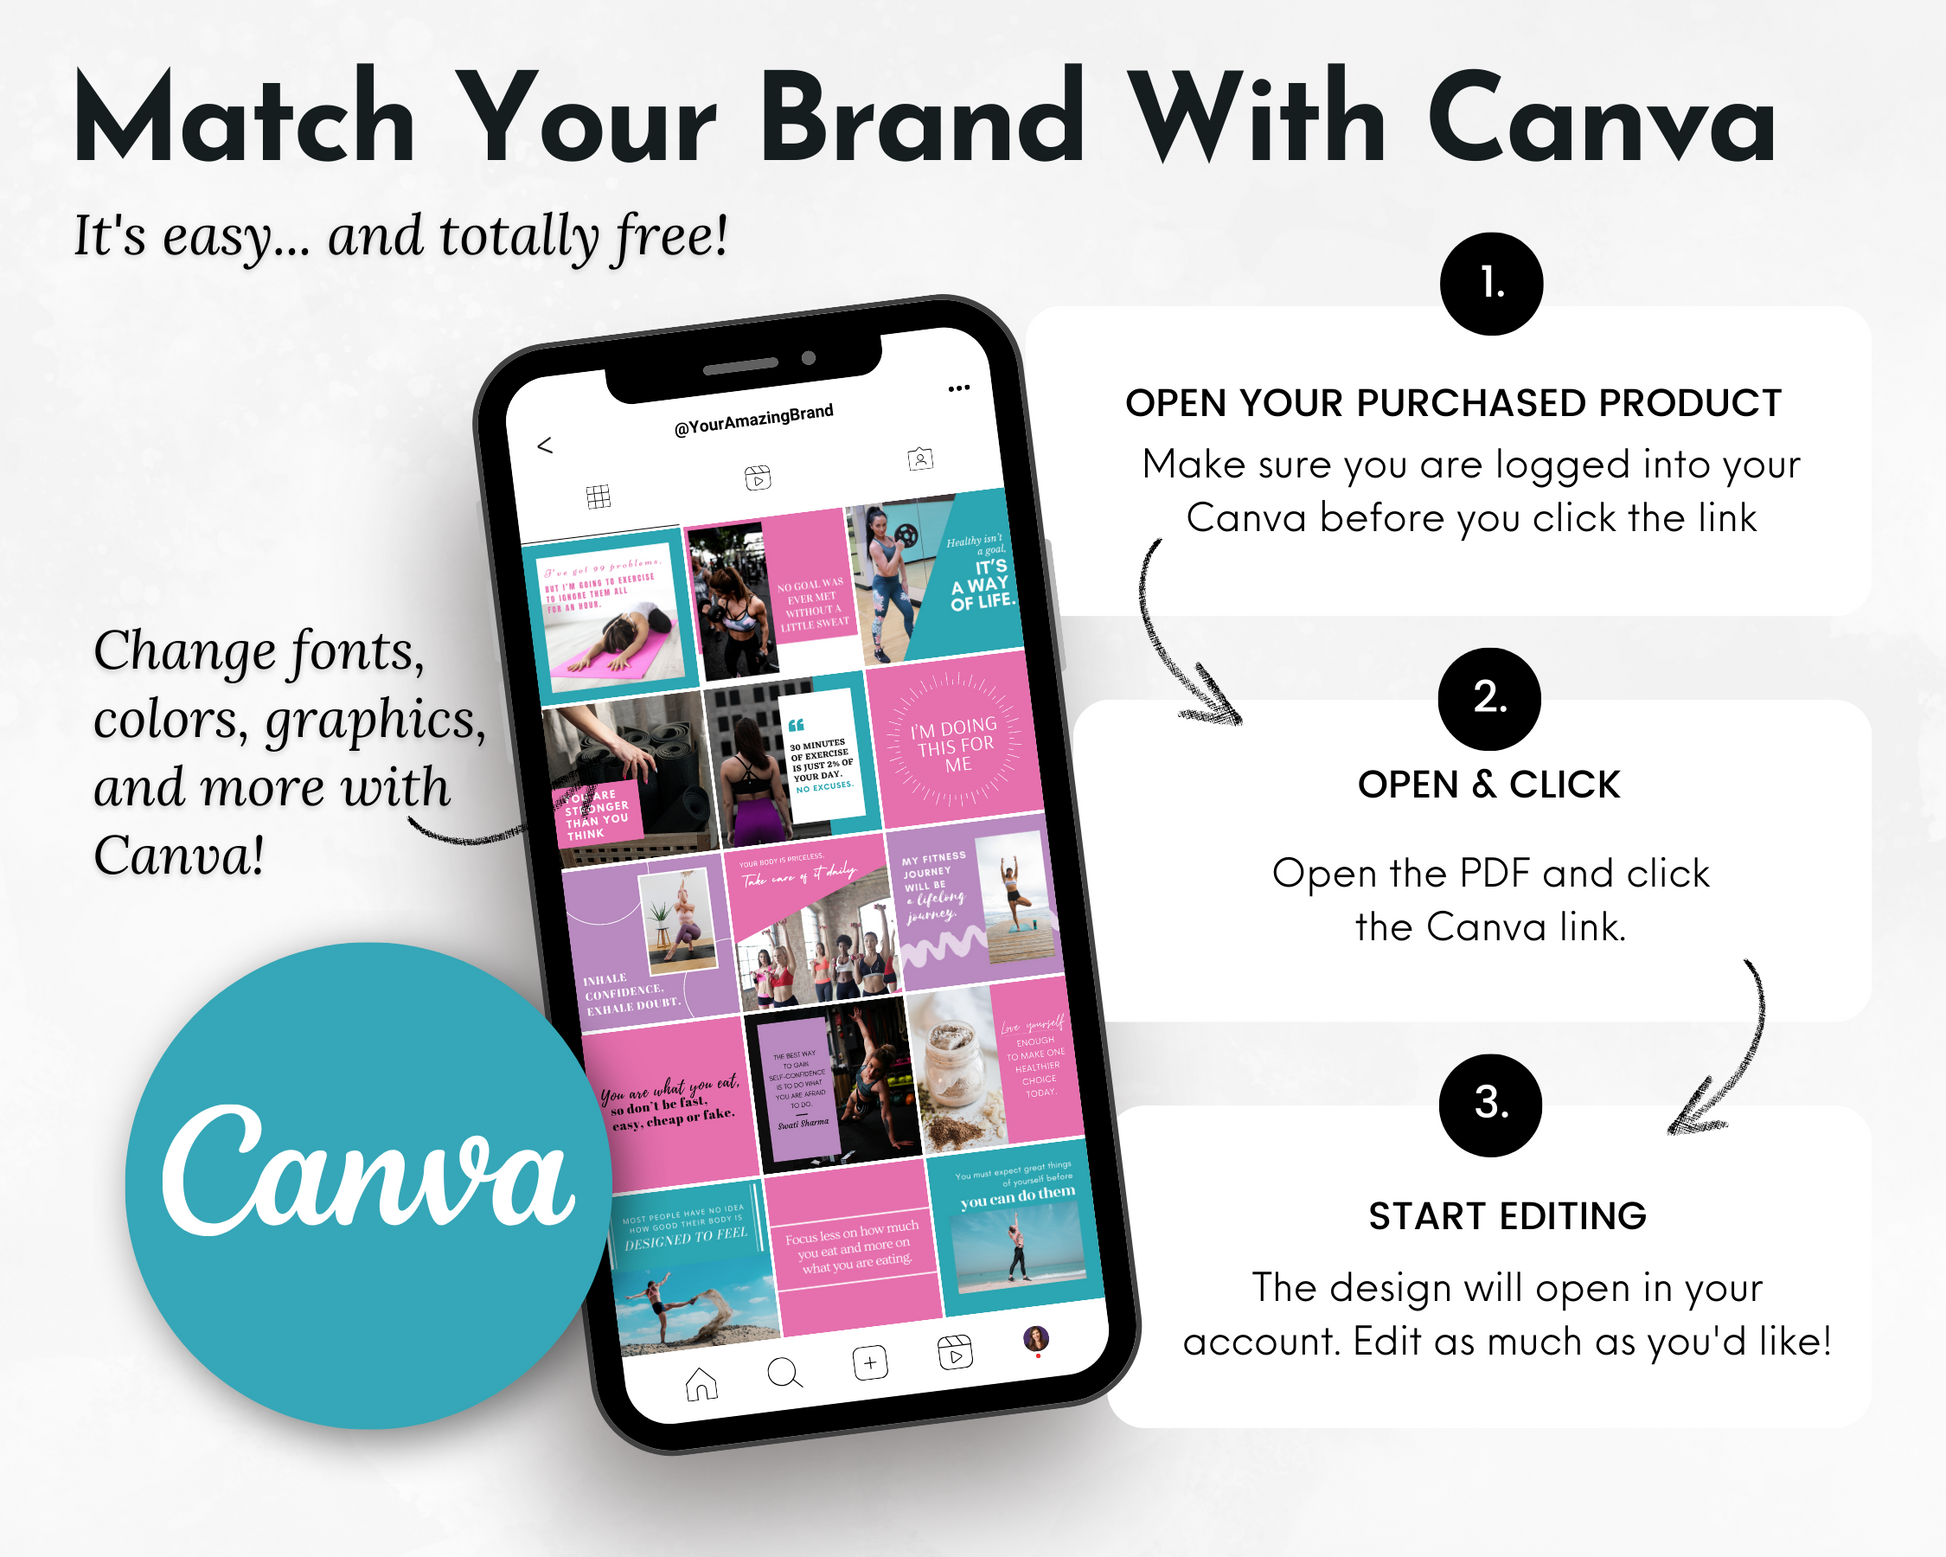 Match your Socially Inclined health and fitness brand with Fitness & Wellness Social Media Post Bundle with Canva Templates for social media images.